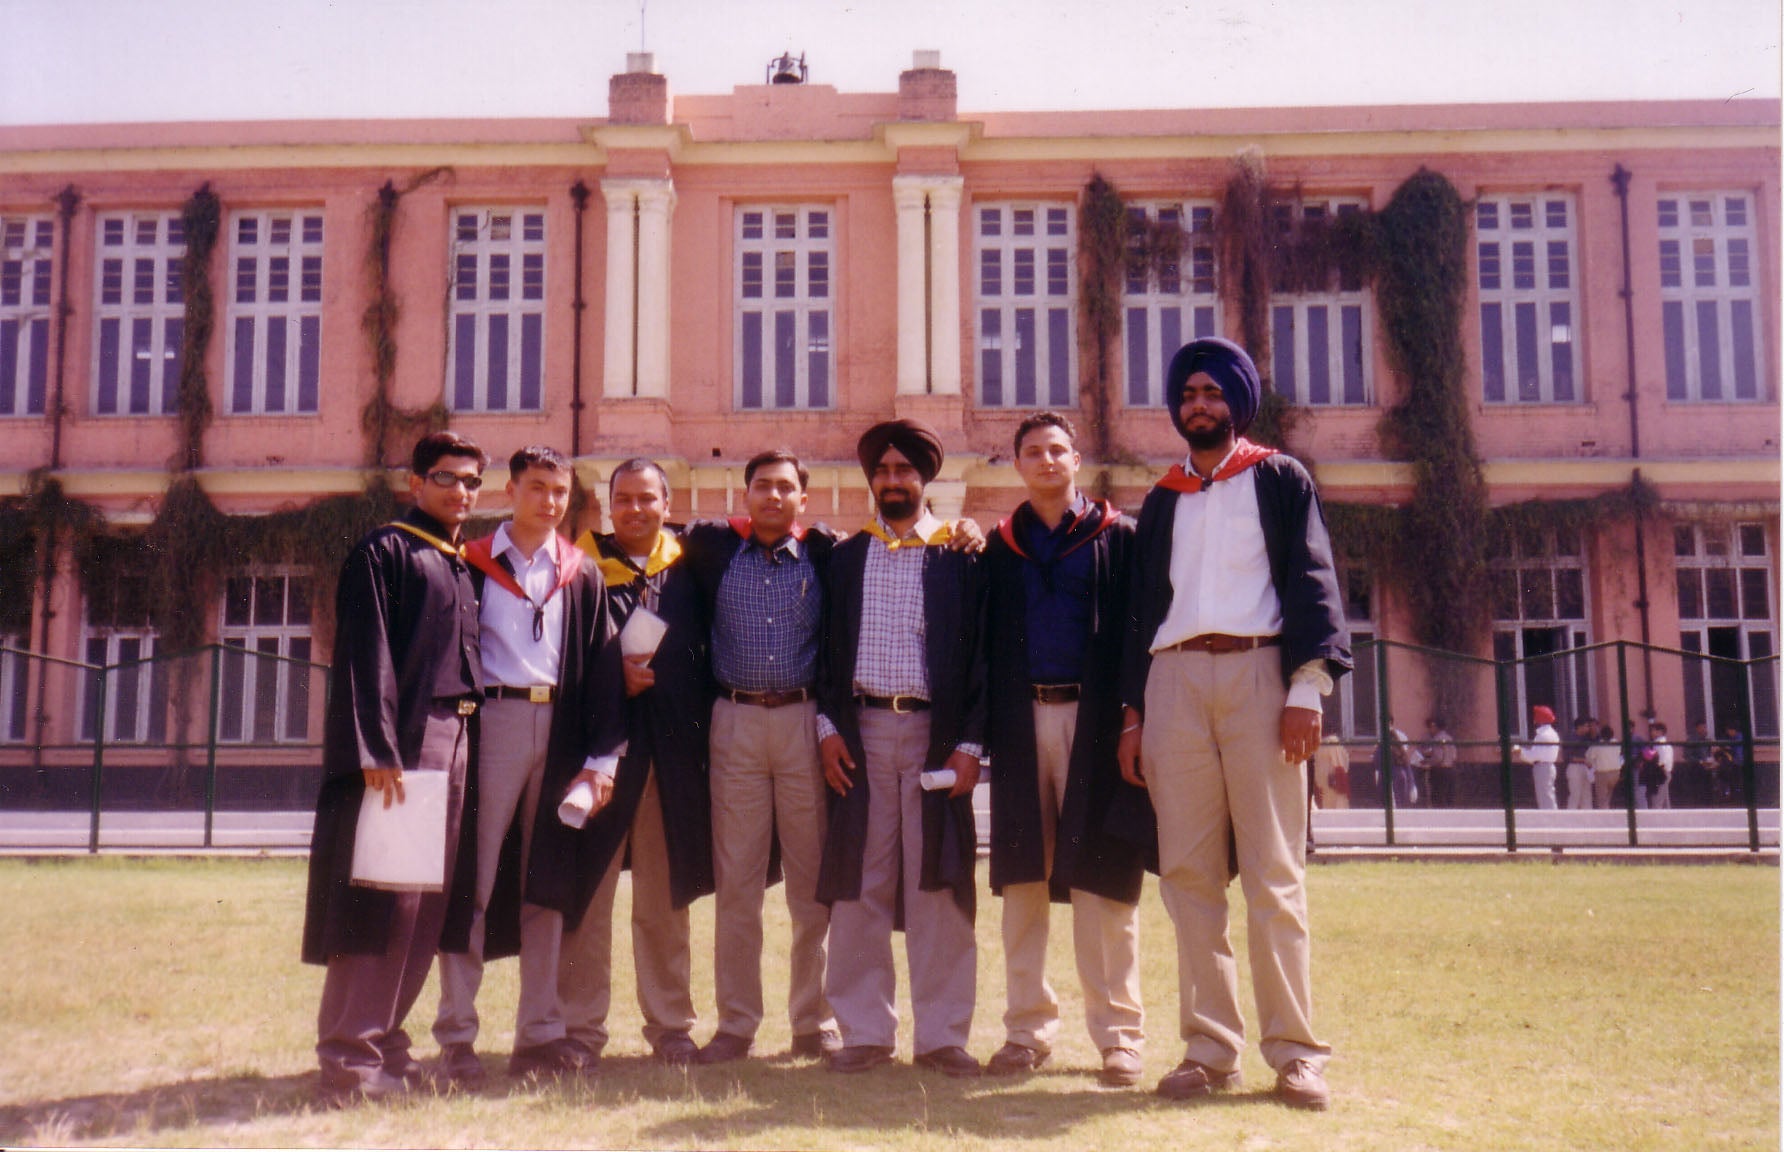 About 20 year old Gurdeep during graduation ceremony at Government College, Ludhiana, Punjab